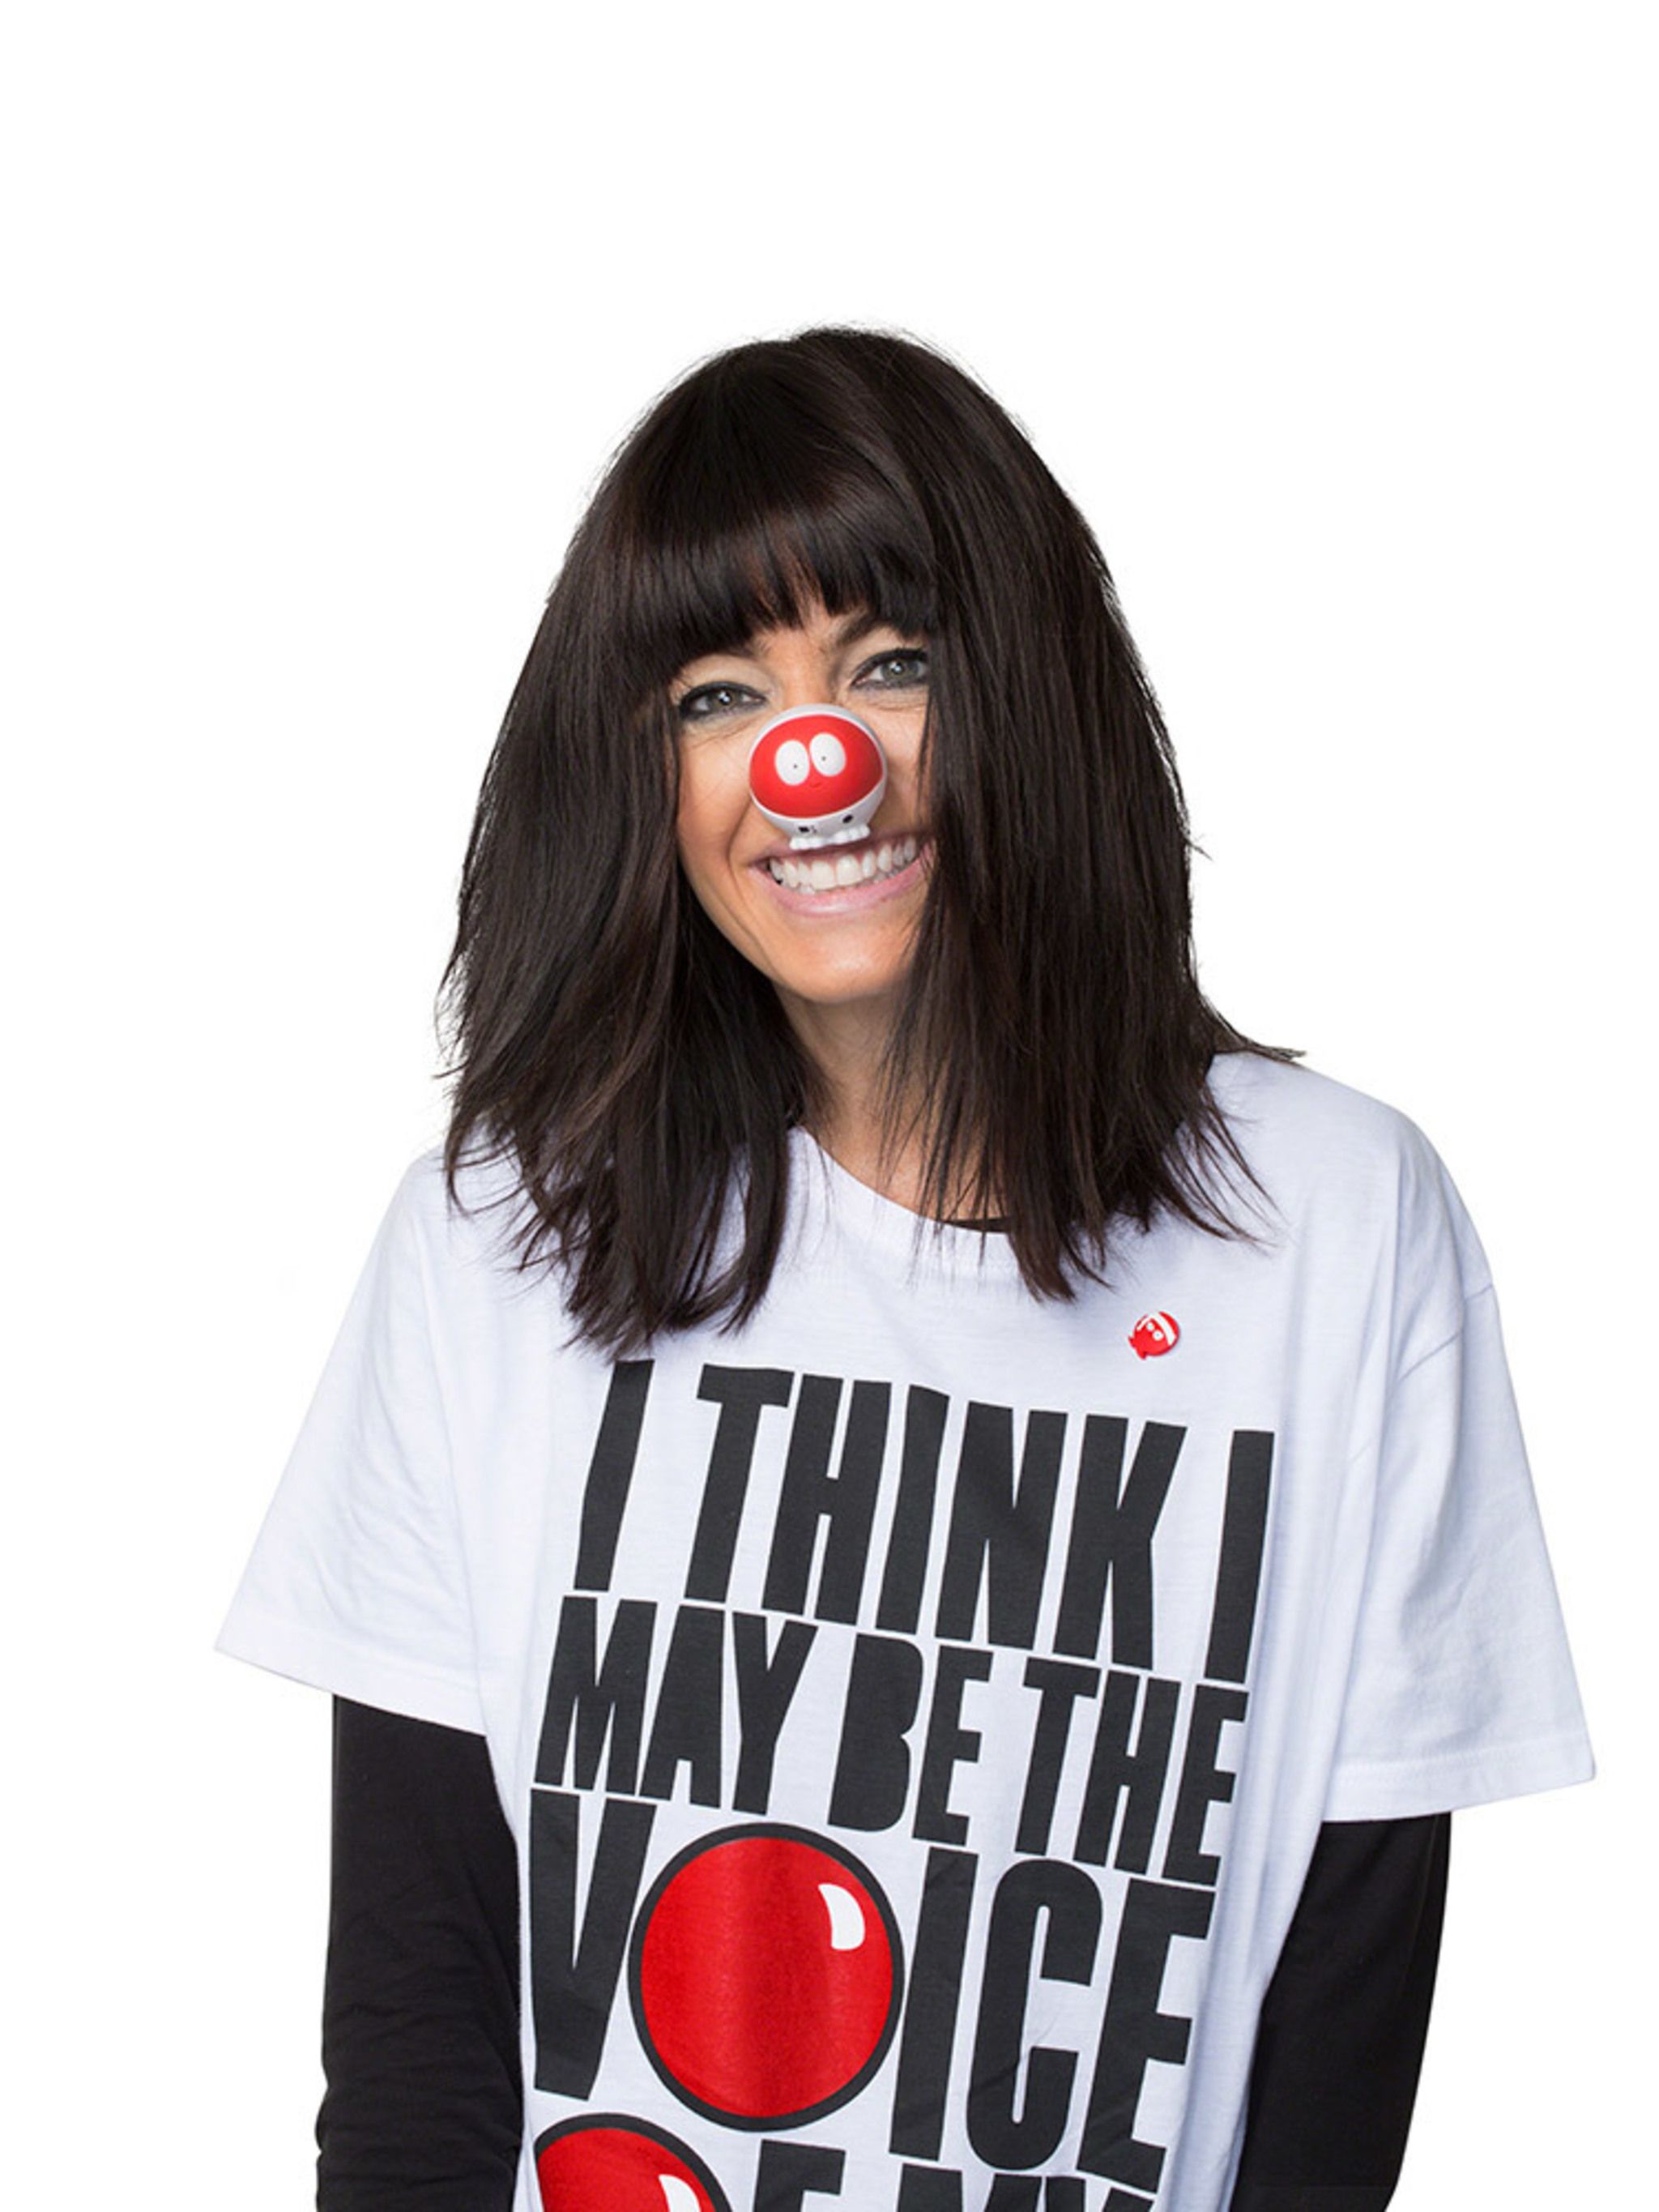 Batch1 Comic Relief Red Nose Day Comedy Cat Unisex Charity Fashion T-Shirt 